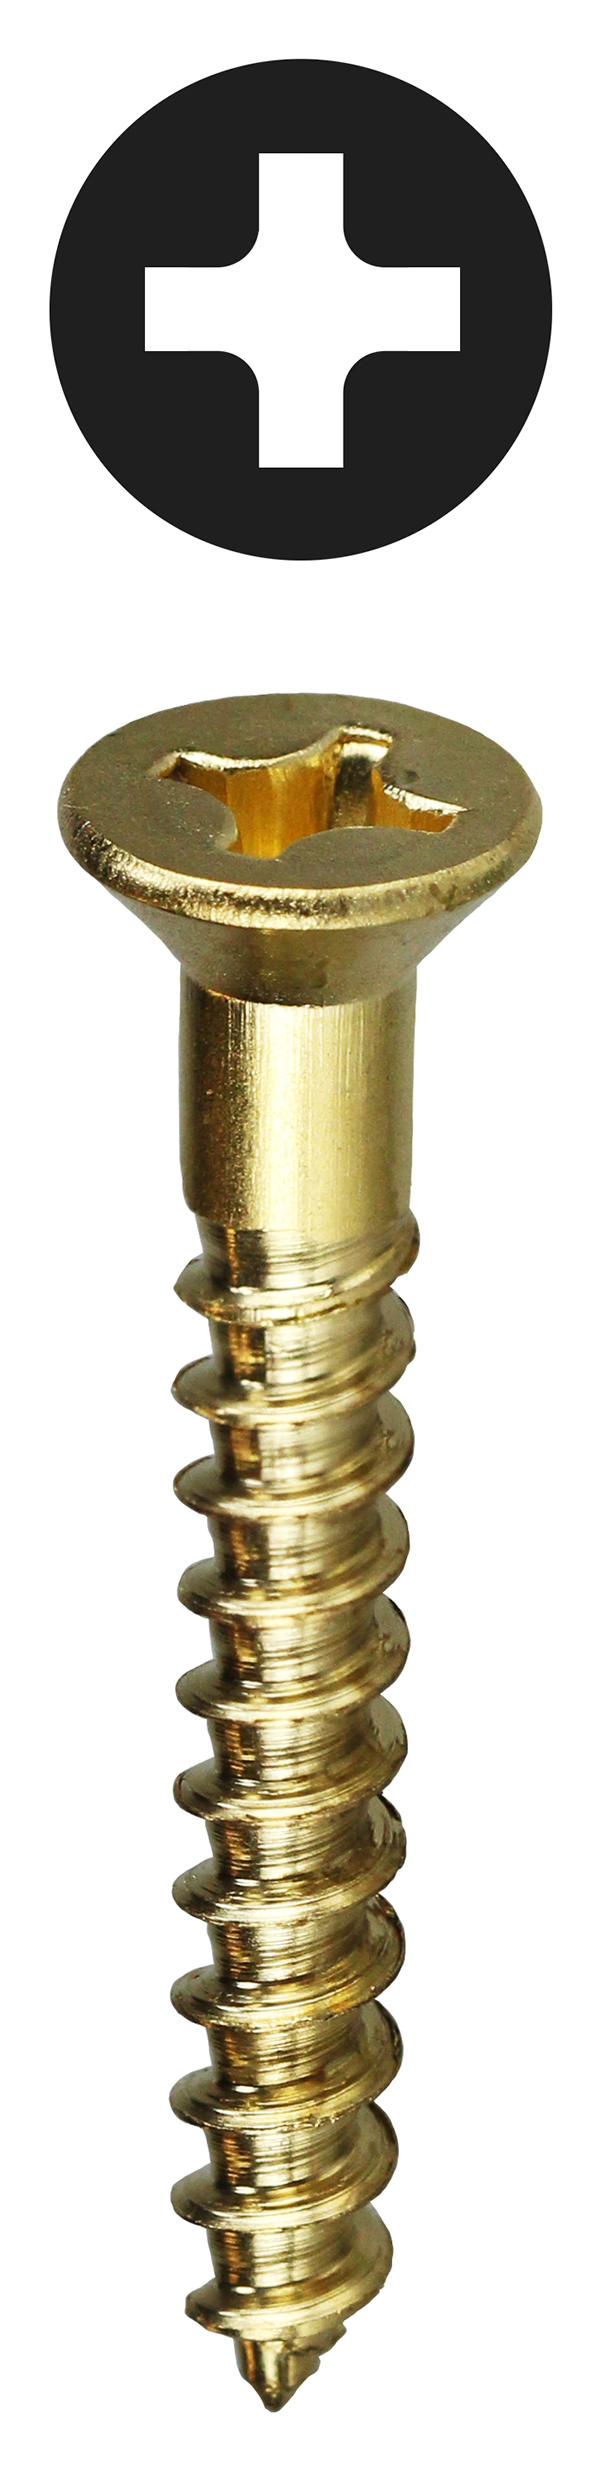 Flat Head Wood Screw, Brass material, #12 x 2-1/2 in. Size, Zinc Plated Finish, Phillips drive type